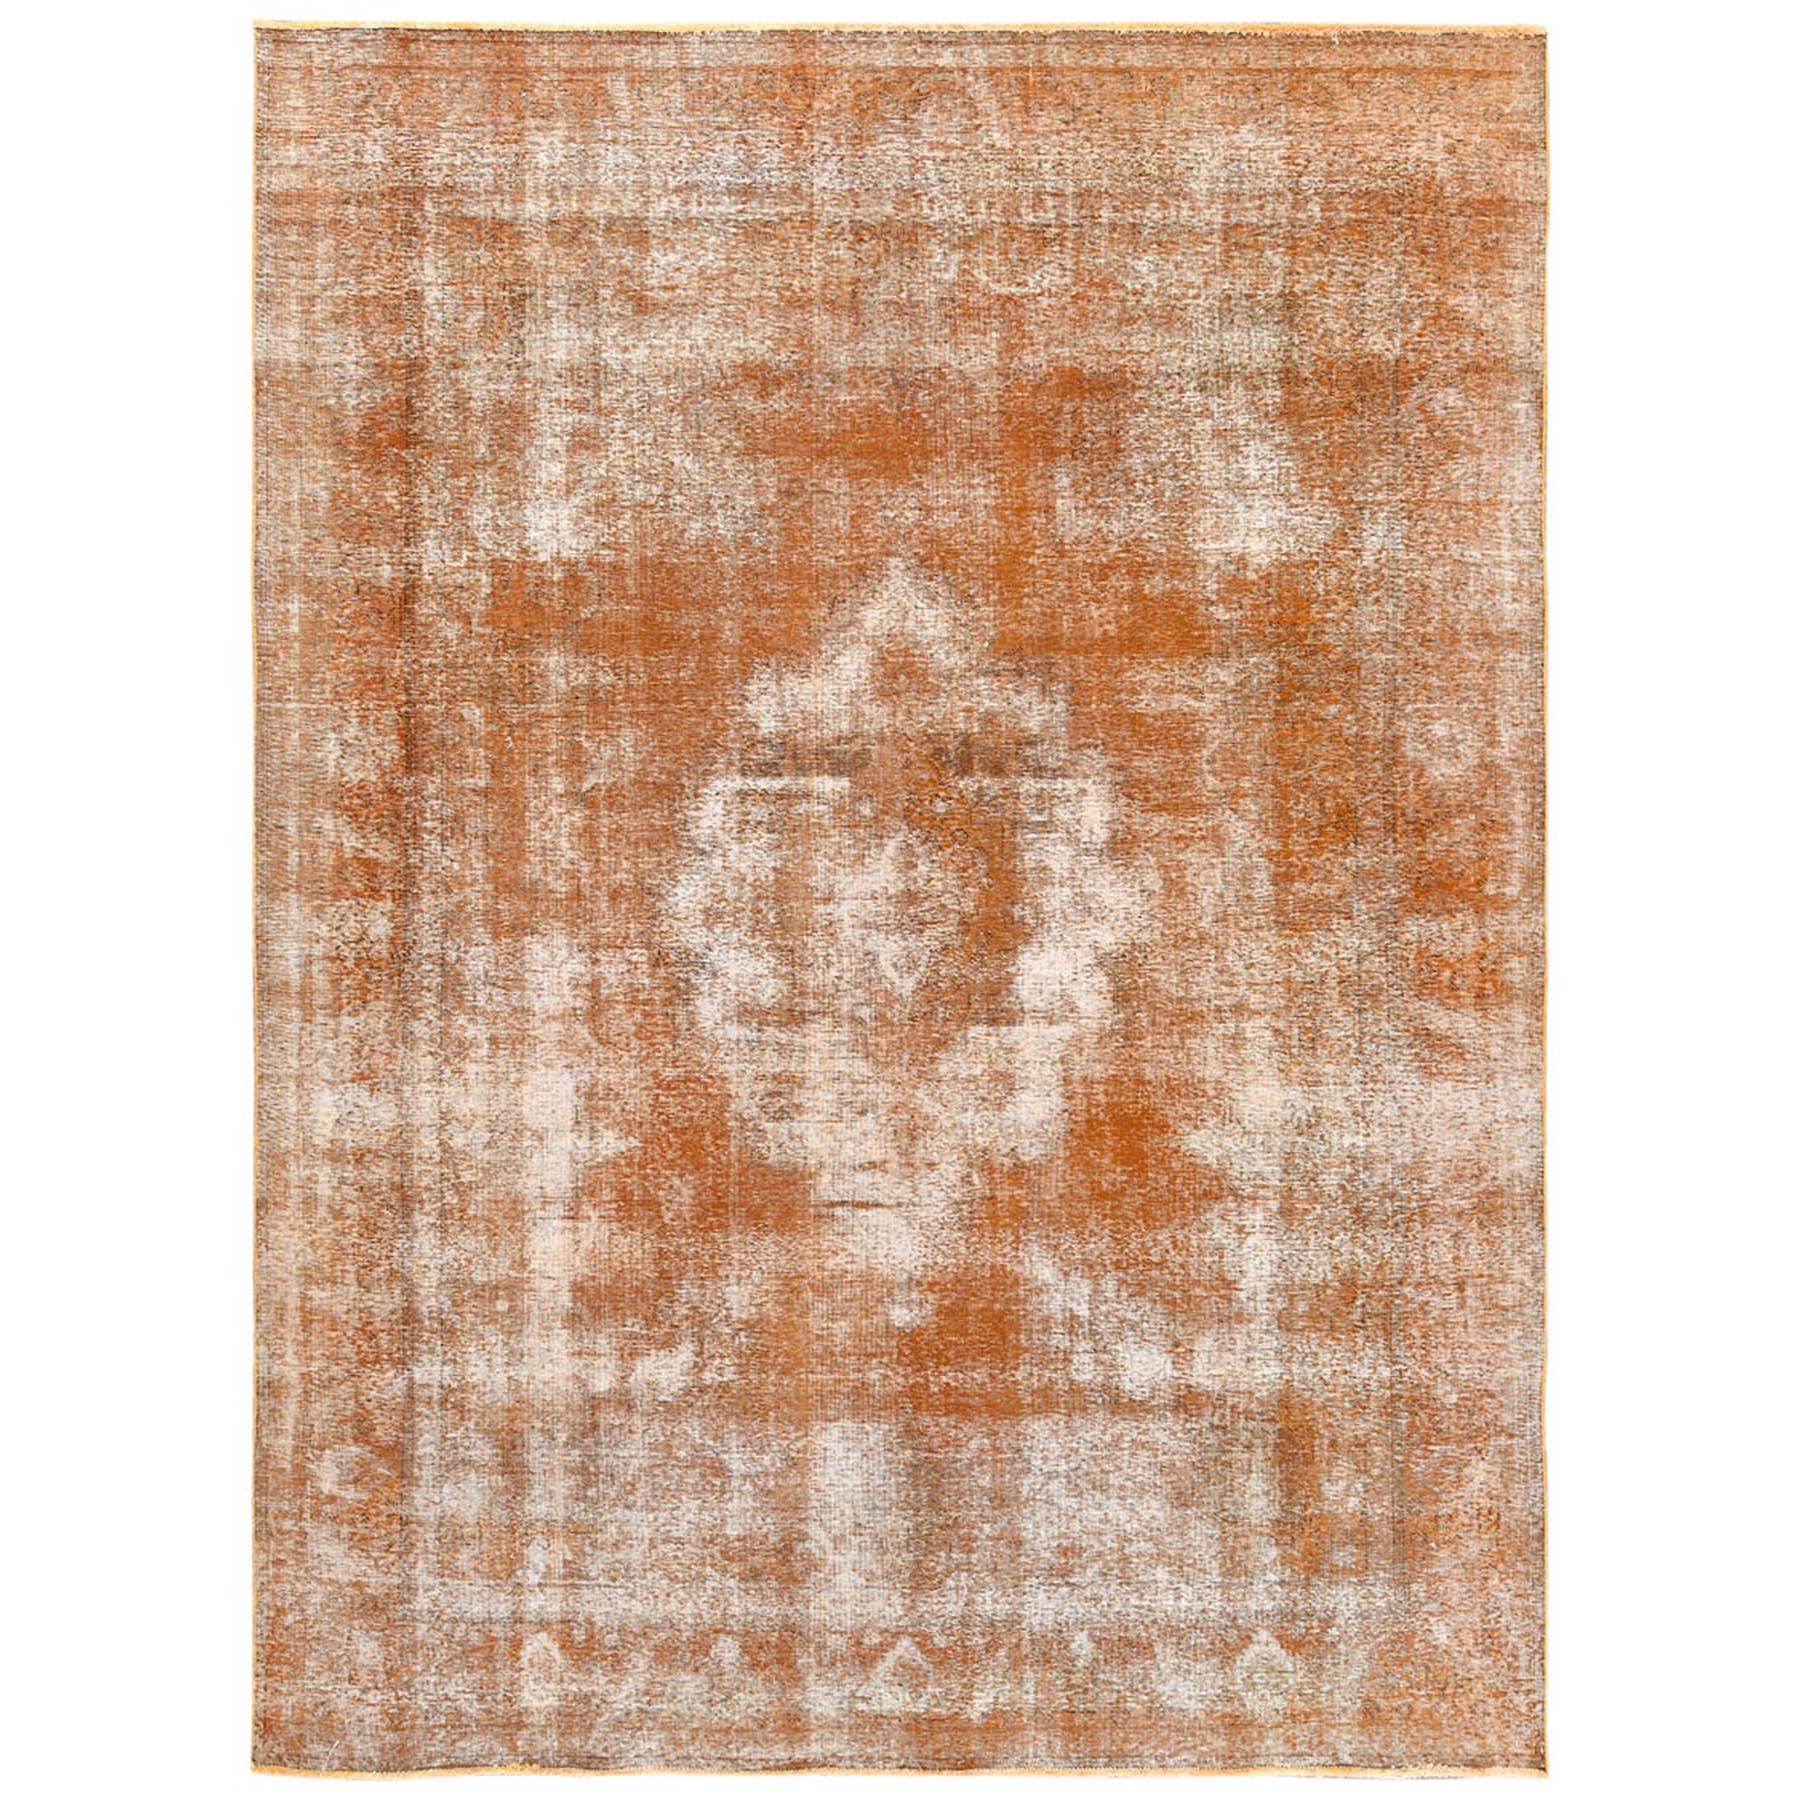 Fetneh Collection And Vintage Overdyed Collection Hand Knotted Orange Rug No: 1121774